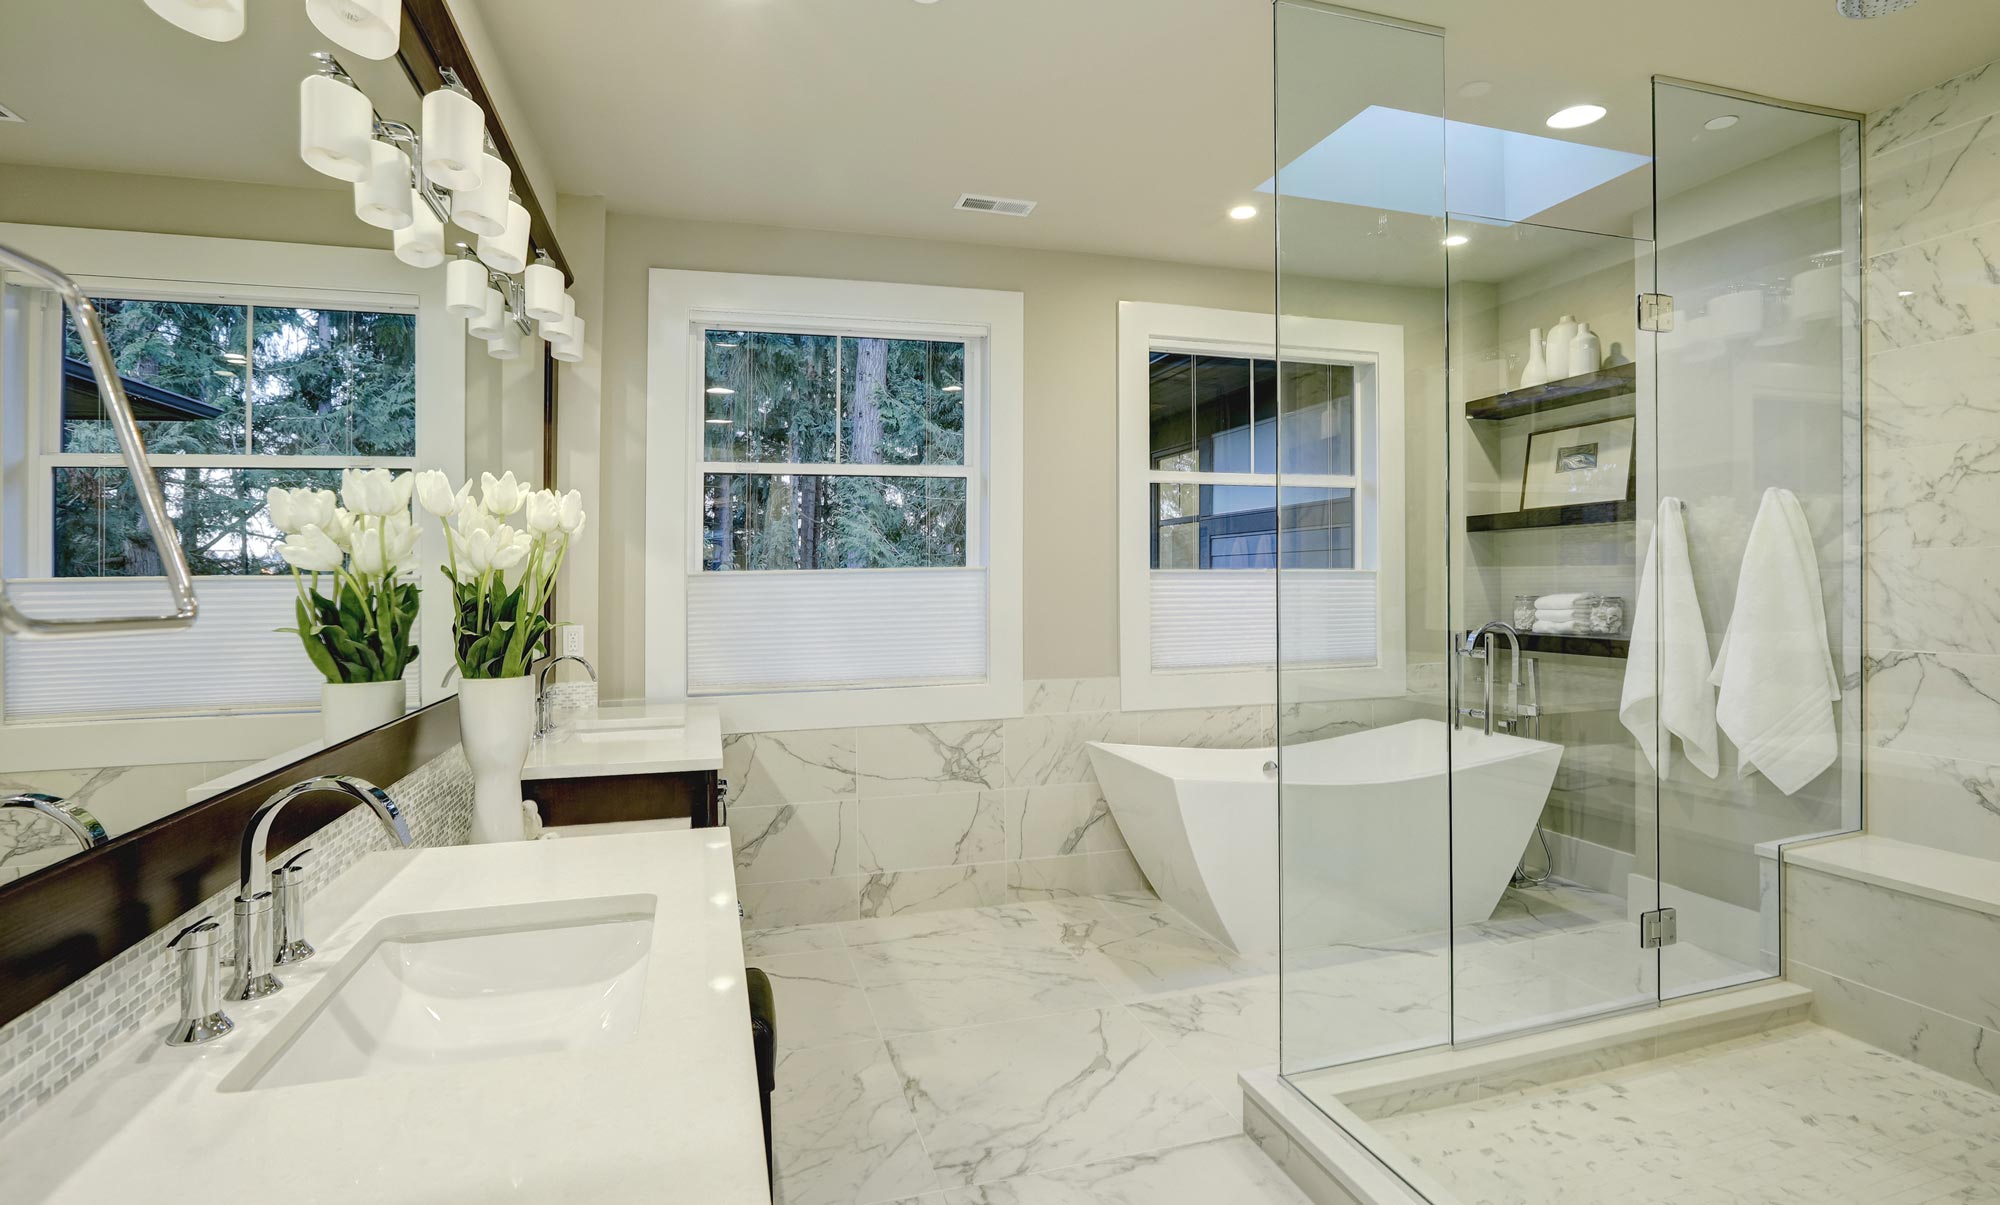 What You Should Know Before Beginning Your Bathroom Renovation